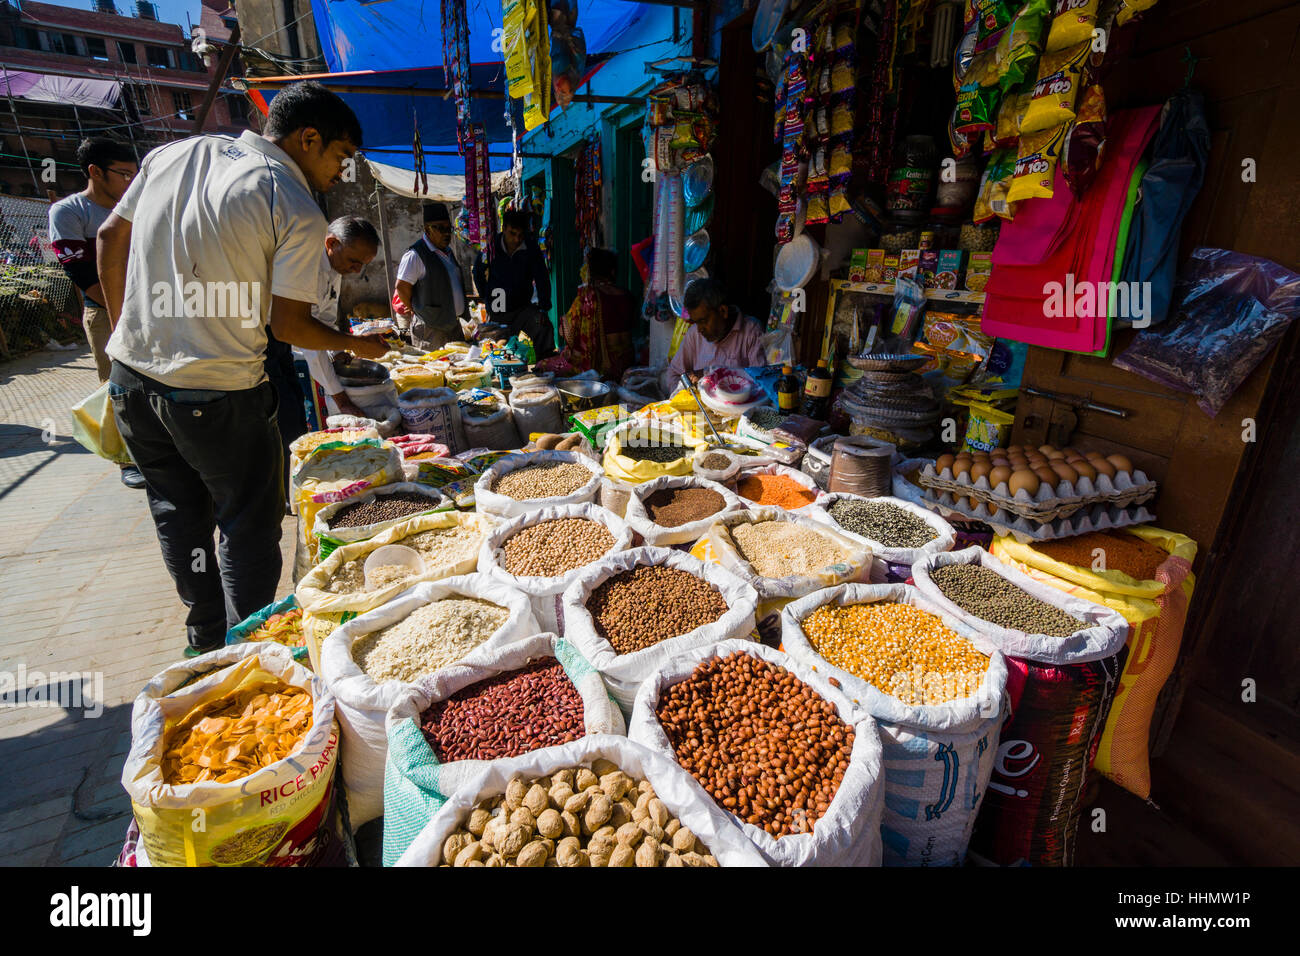 Different spices, nuts, beans and lentils are sold in street market, Kathmandu, Kathmandu District, Nepal Stock Photo